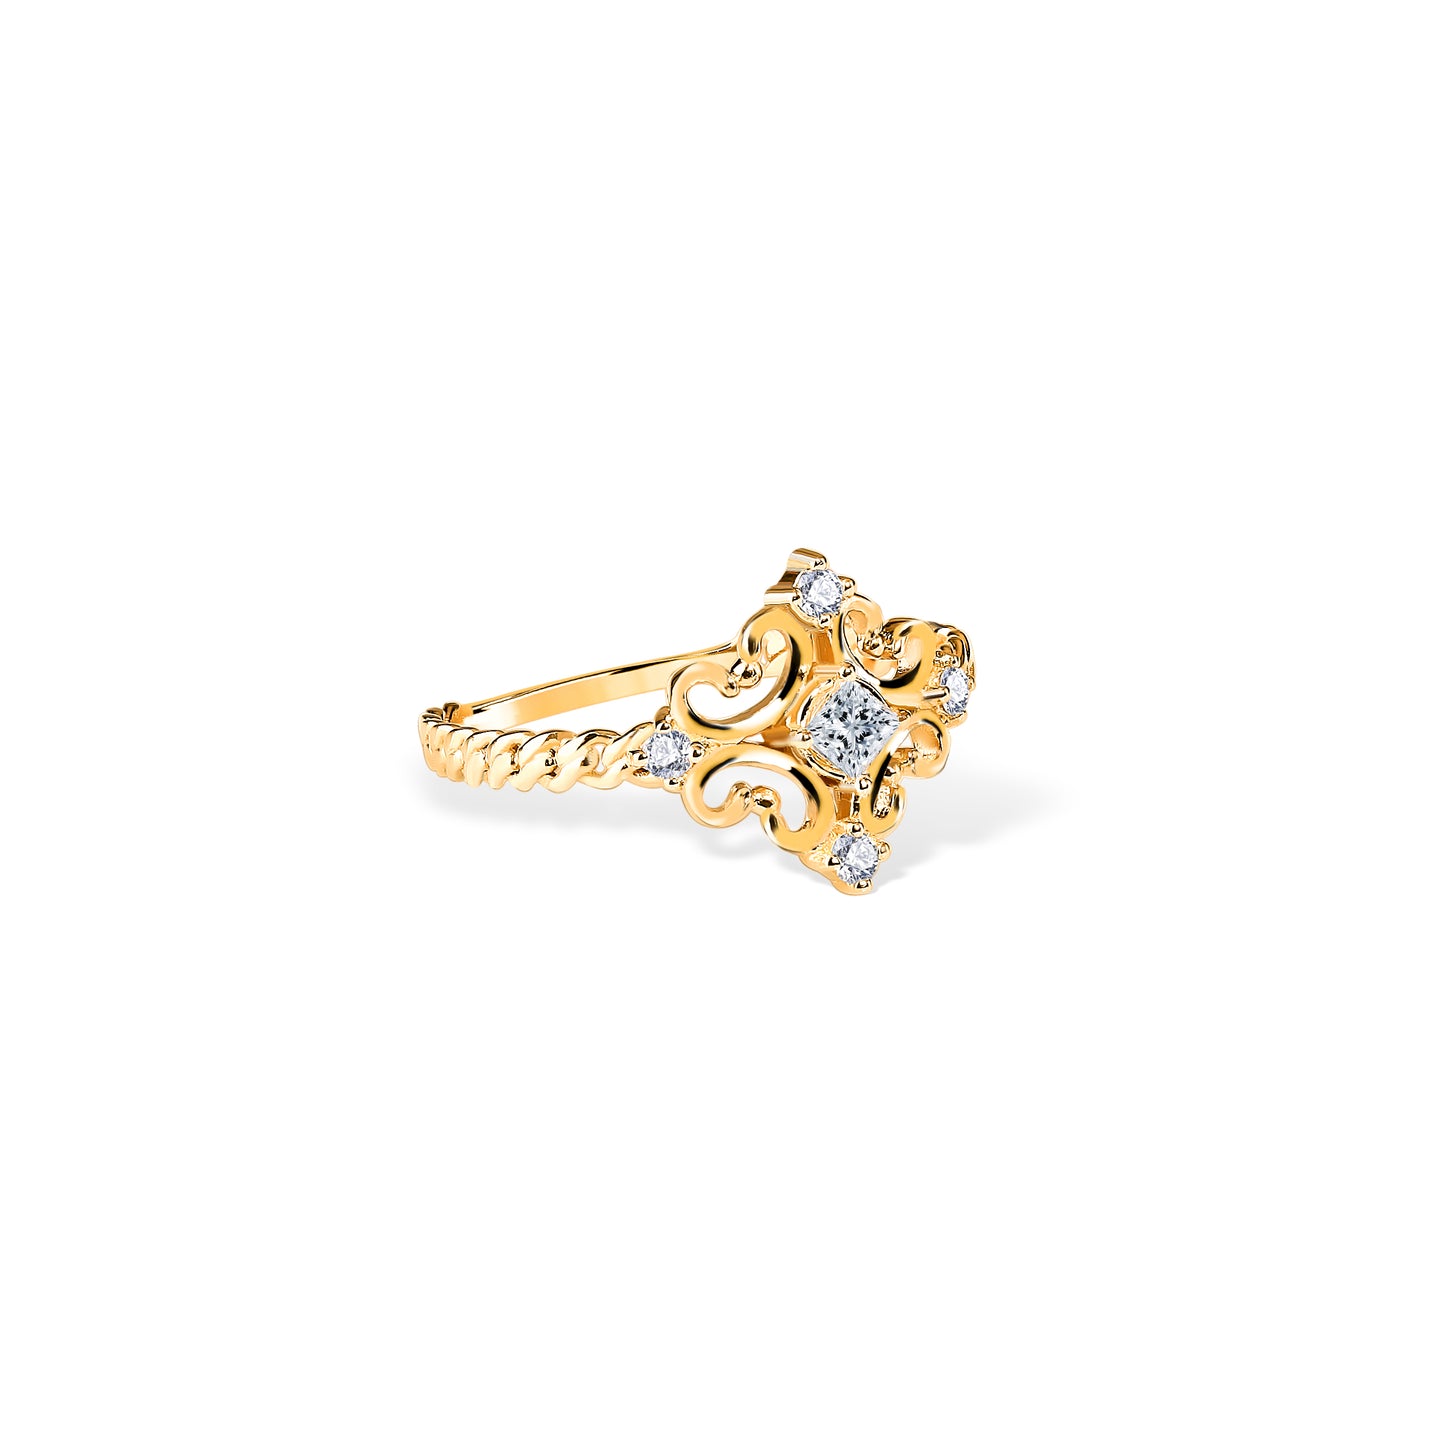 Vintage Diamond Ring with Chain Shank Ring in 14K Yellow-Rose-White Gold Band Ring for Stylish Women